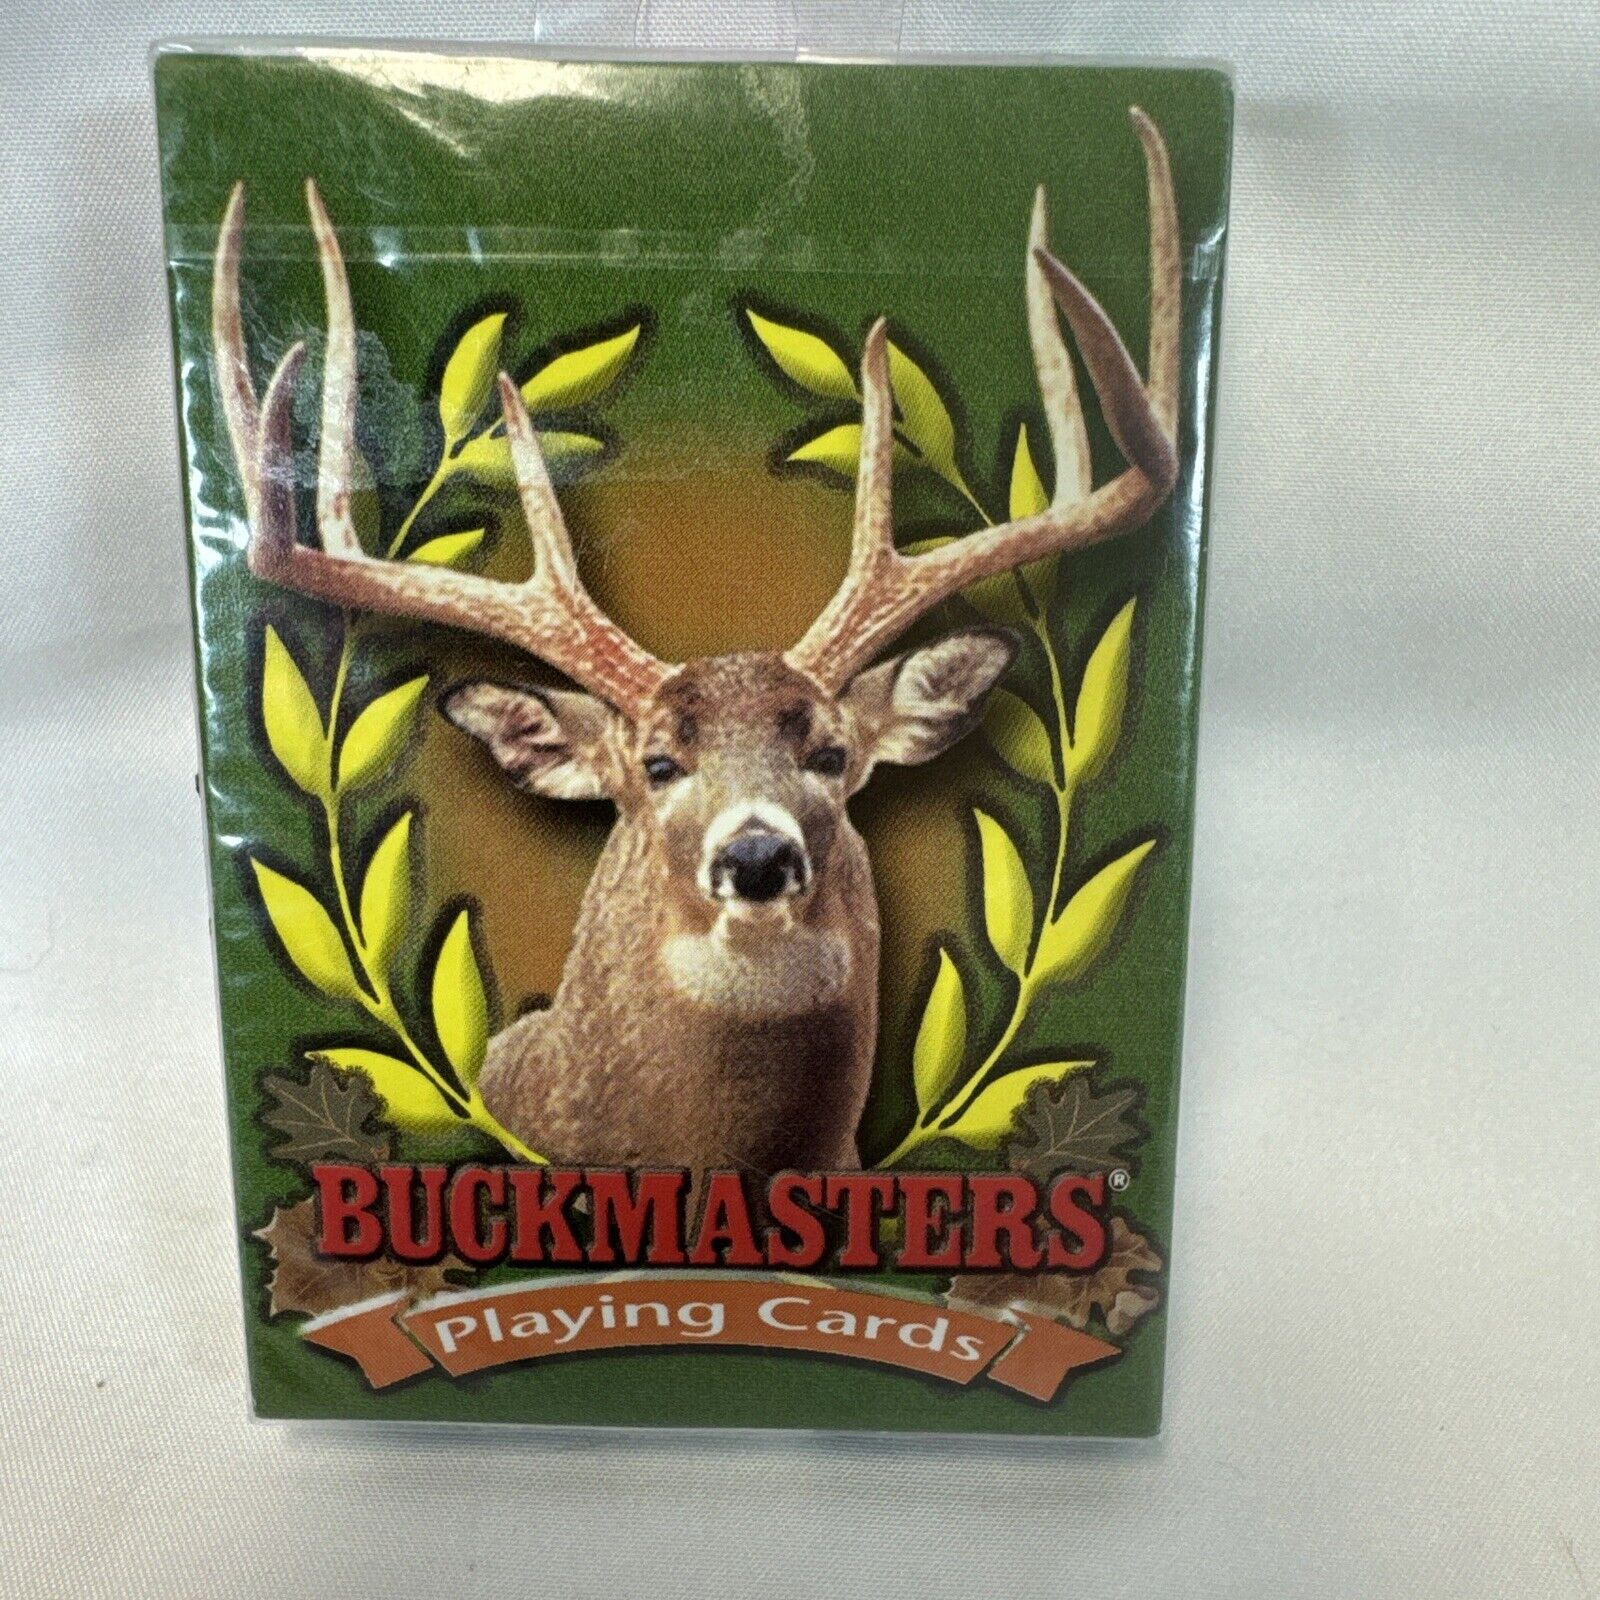 New Sealed BICYCLE BUCKMASTERS Playing Cards Pictures Of Bucks And Doe’s On Them